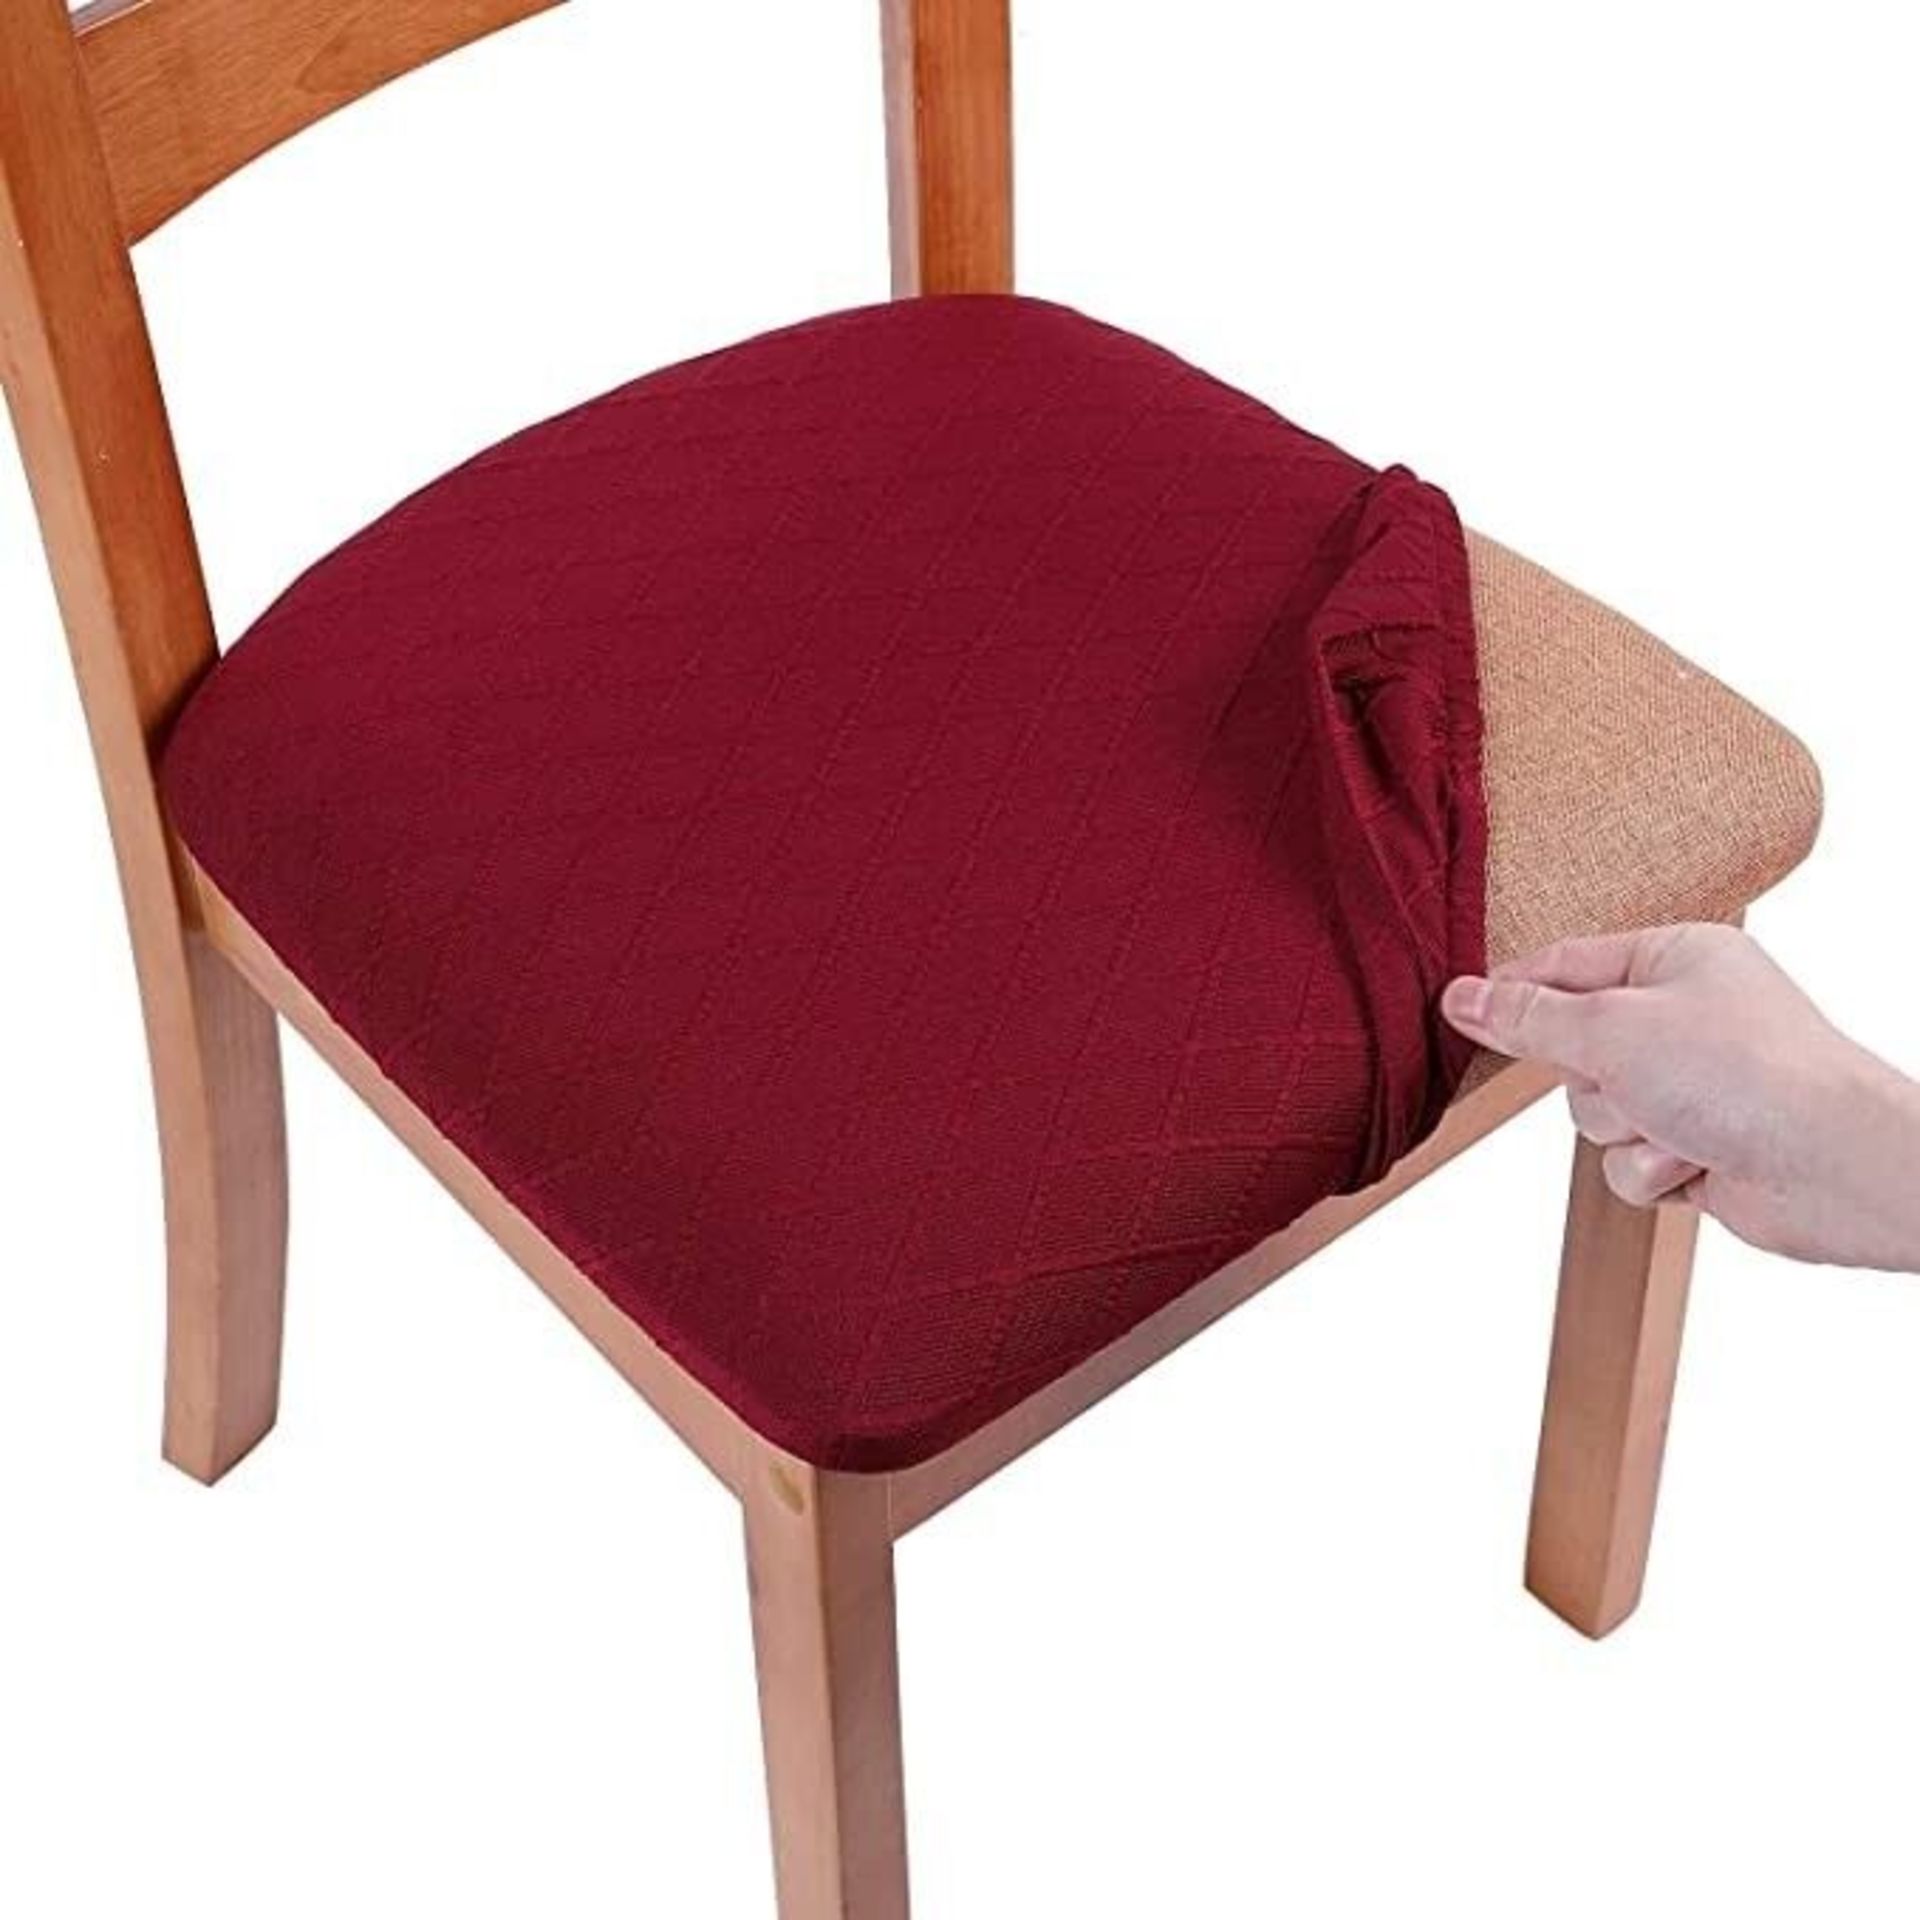 26 Stretch Dining Chair Covers Seat Chair Covers Removable Slip Covers Burgundy